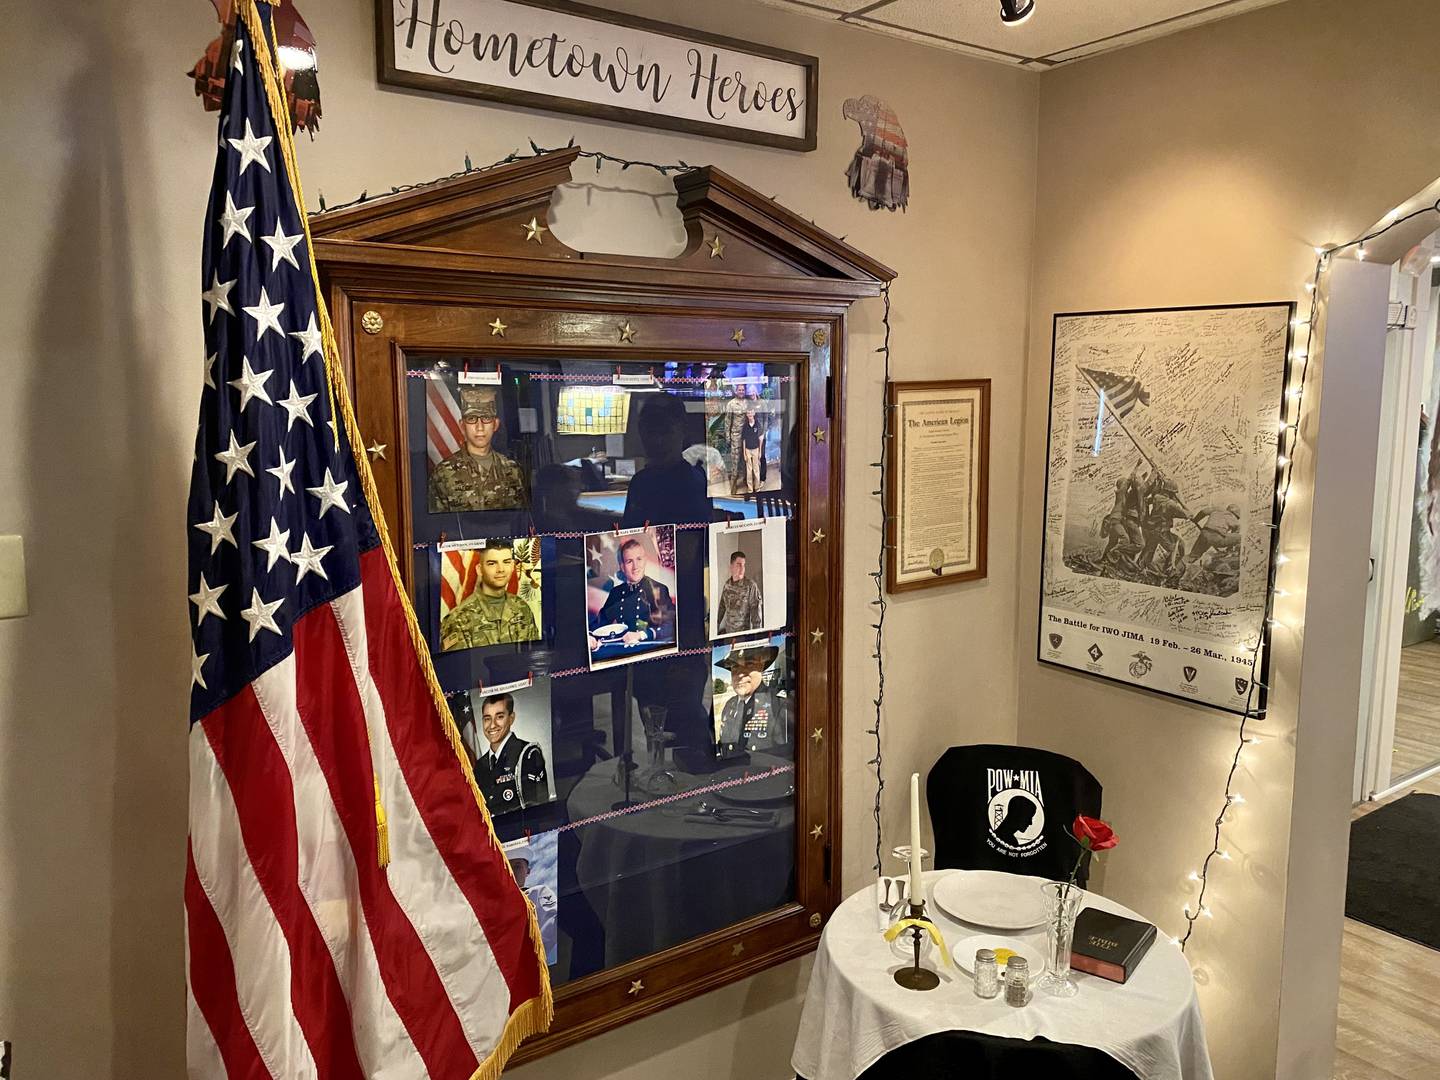 A memorial to veterans who were killed or missing in action and prisoners of war stands erect on Friday, Oct. 20, 2023 at the American Legion Post No. 66, 1204 S. Fourth St., in DeKalb. A table is always set for the soldiers who didn't come home.